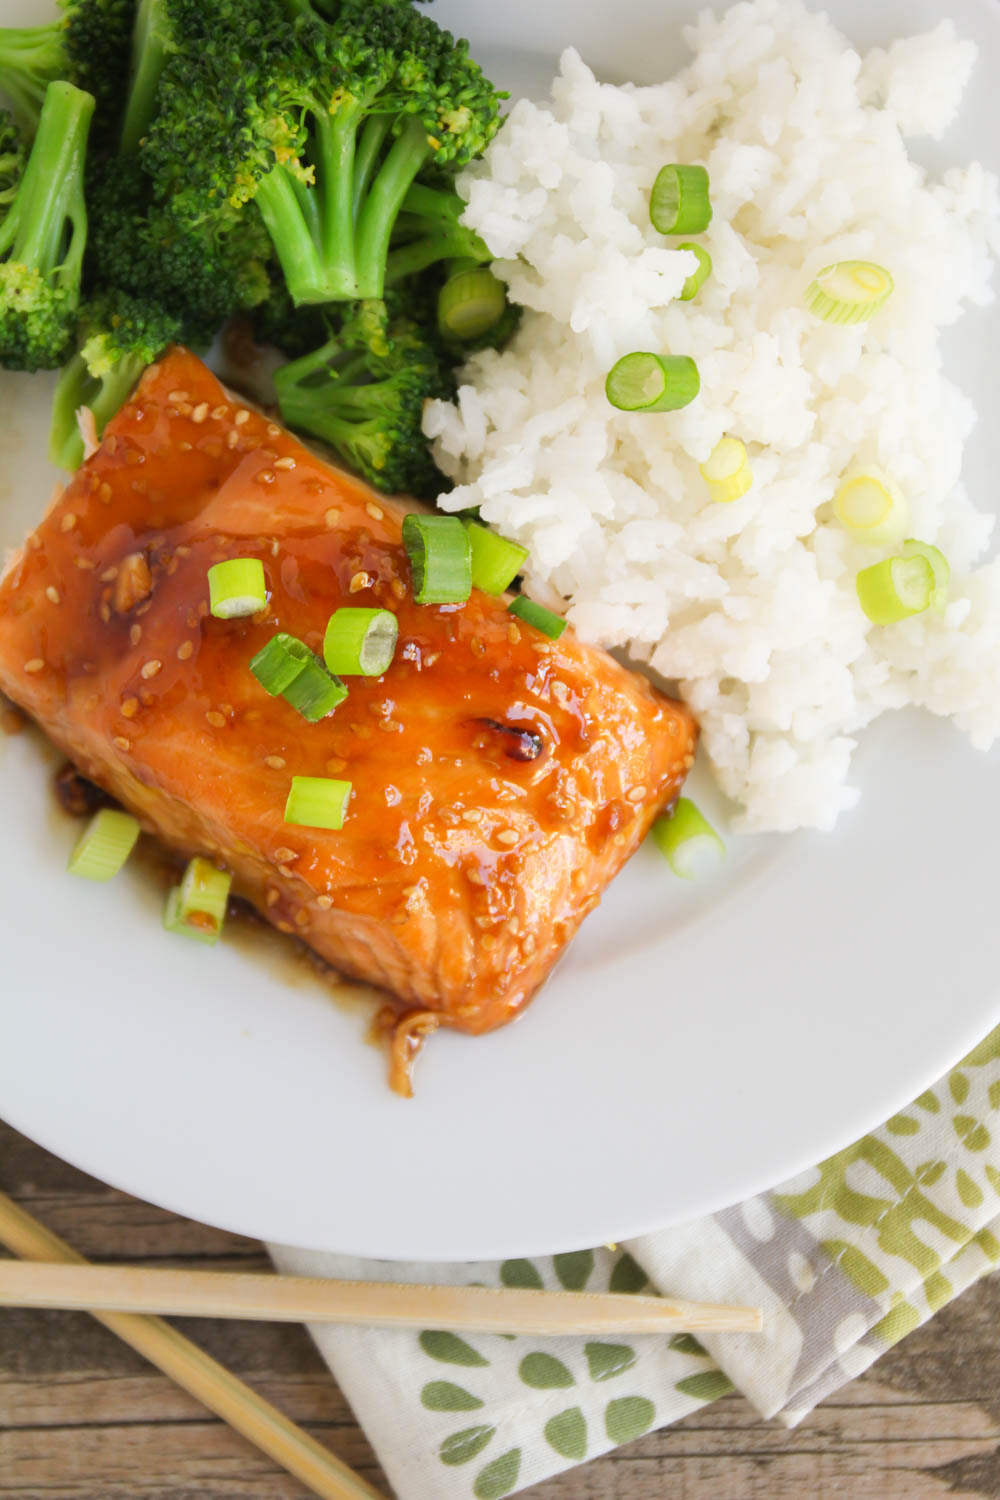 This baked teriyaki salmon is super simple to make and incredibly flavorful and delicious!